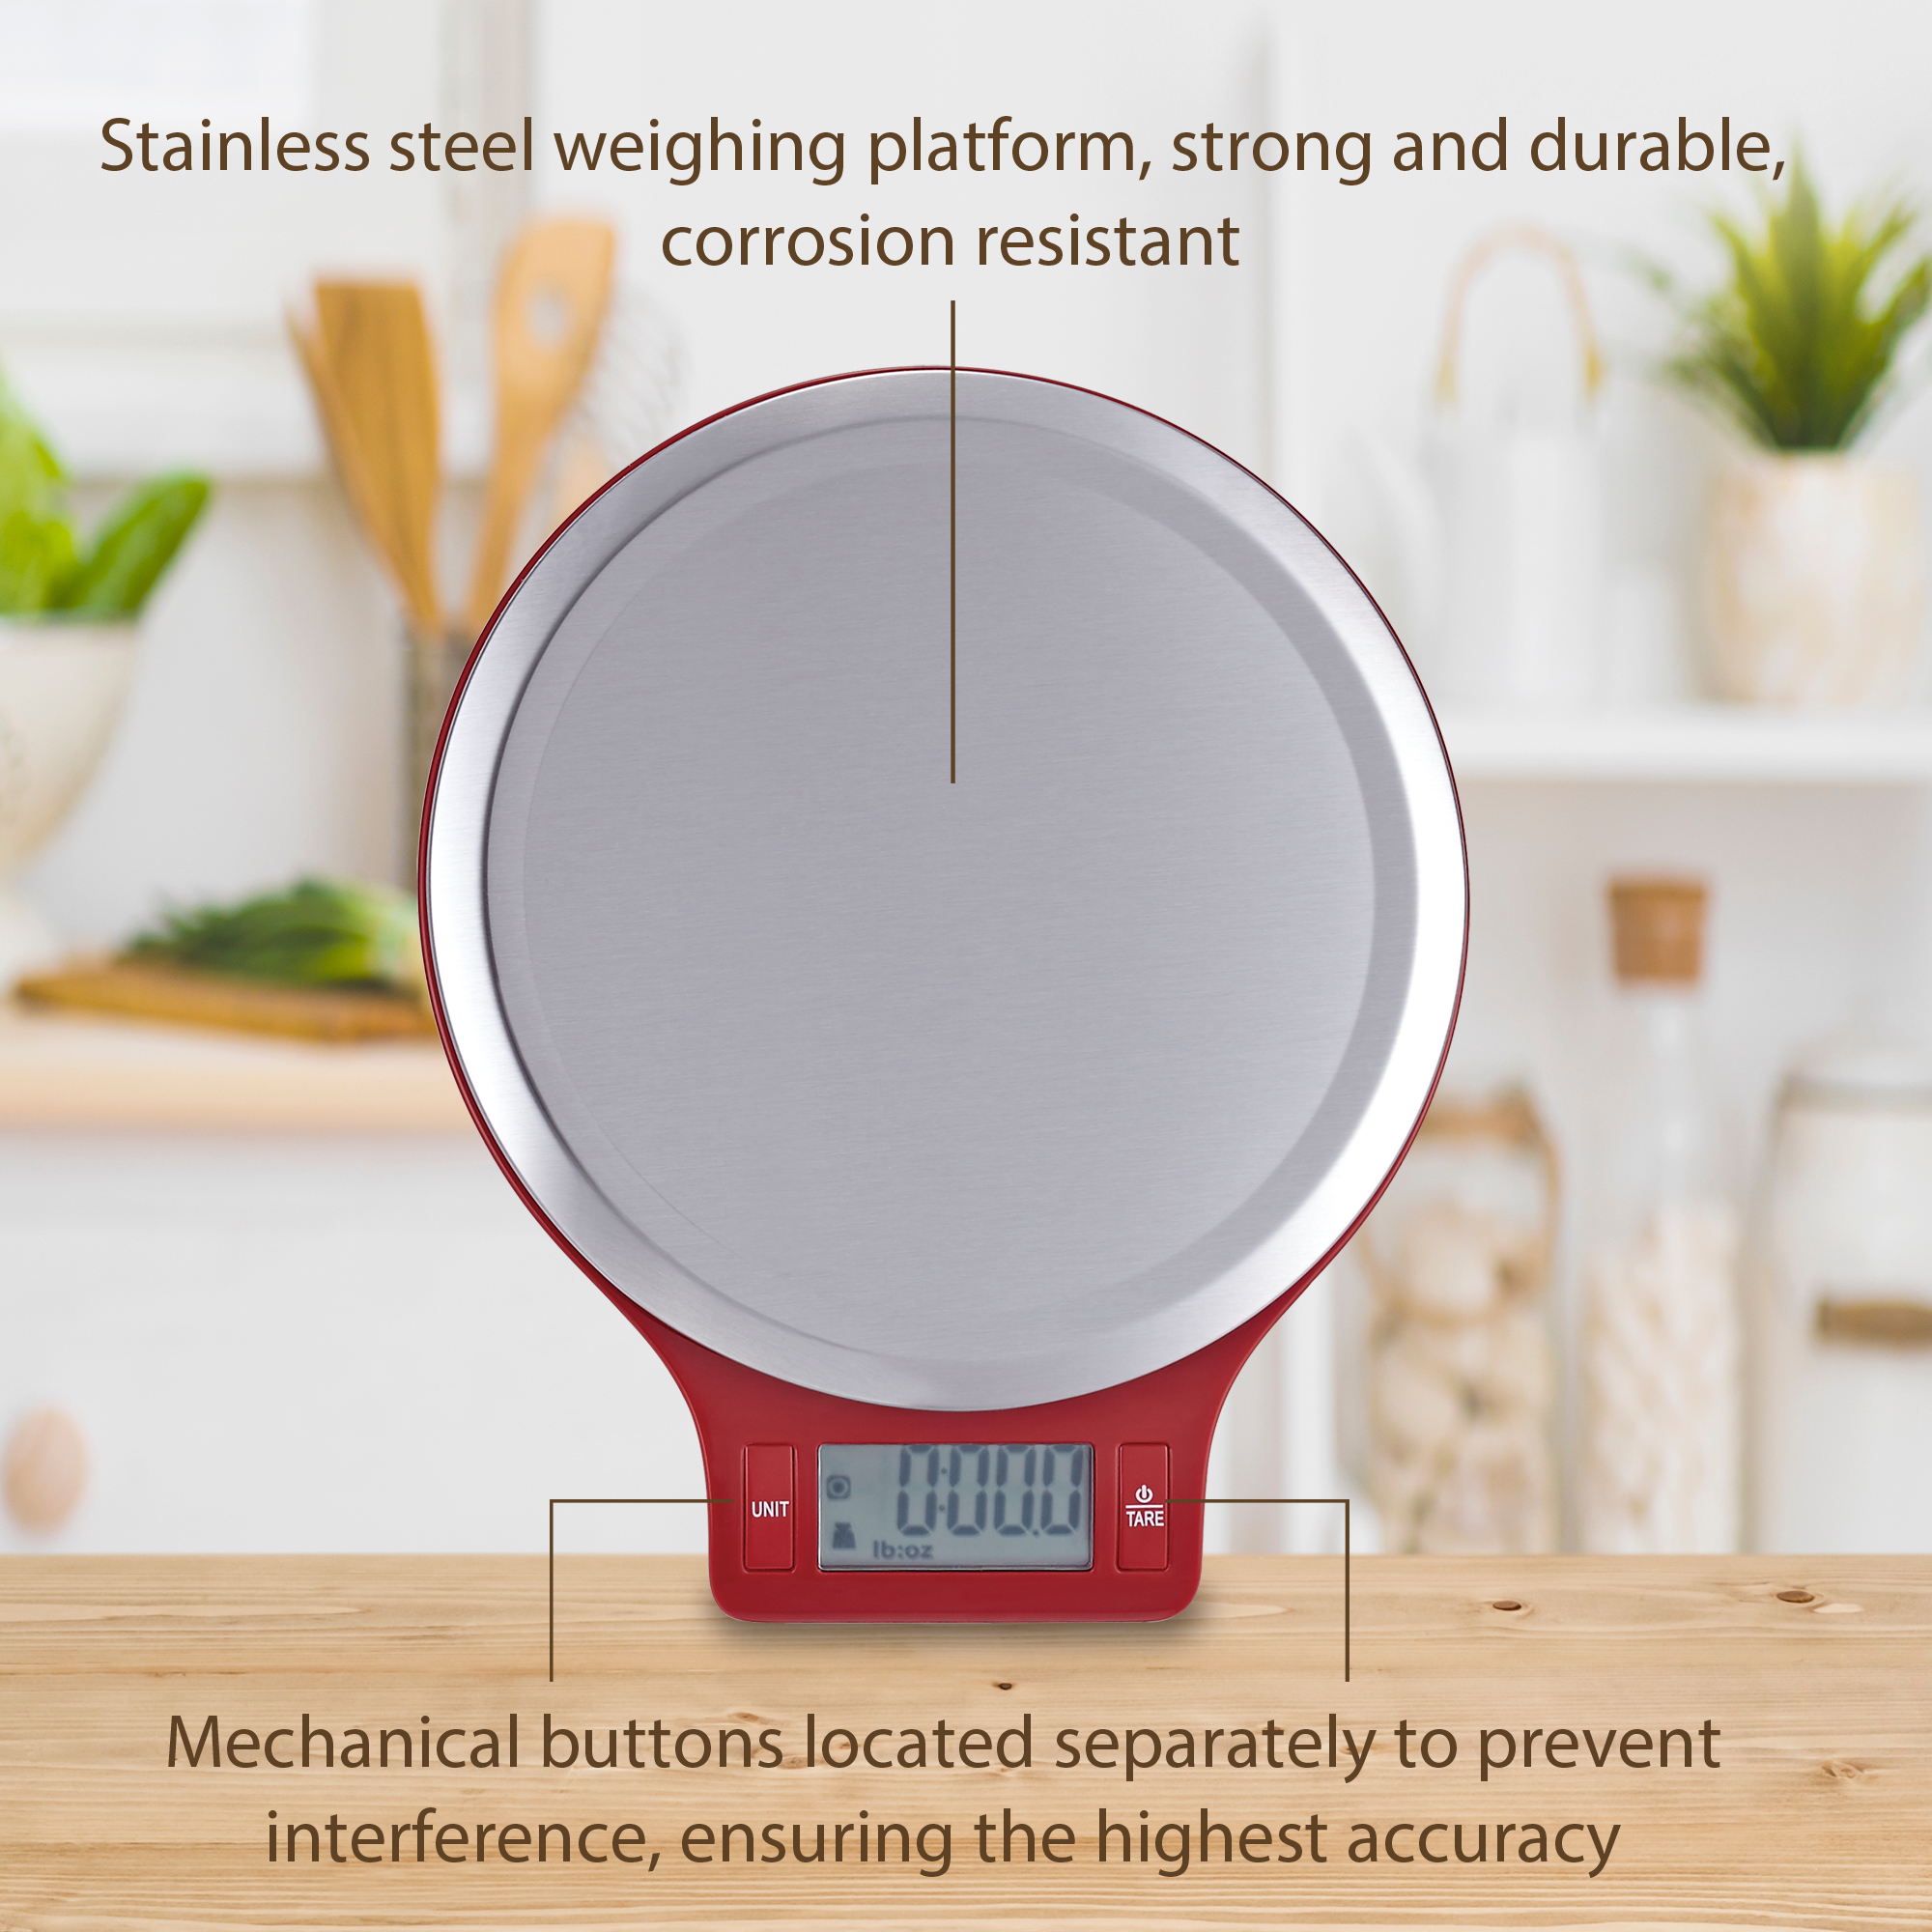 Mainstays Round Stainless Steel Digital Kitchen Scale, Red - image 3 of 11